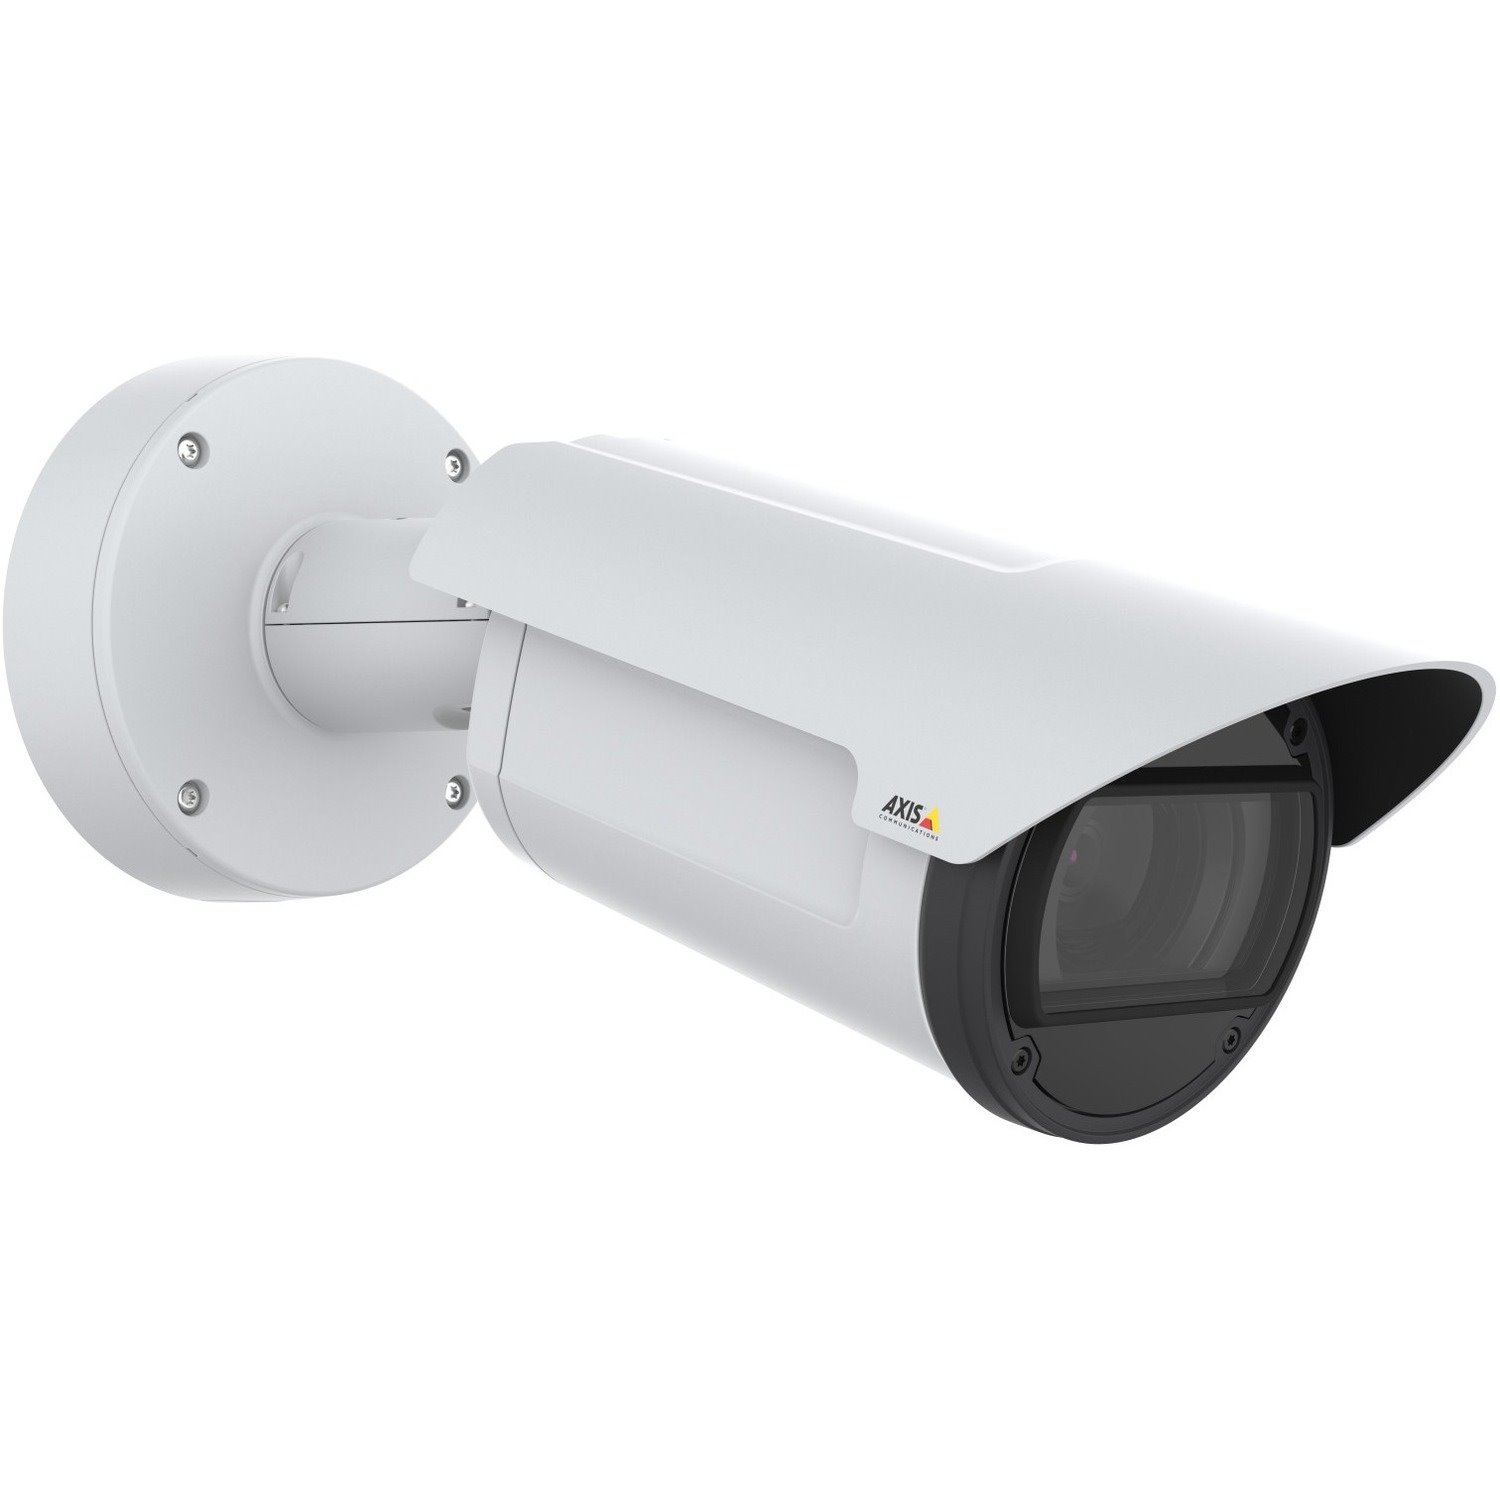 AXIS Q1785-LE 2 Megapixel Indoor/Outdoor Full HD Network Camera - Colour - Bullet - White - TAA Compliant